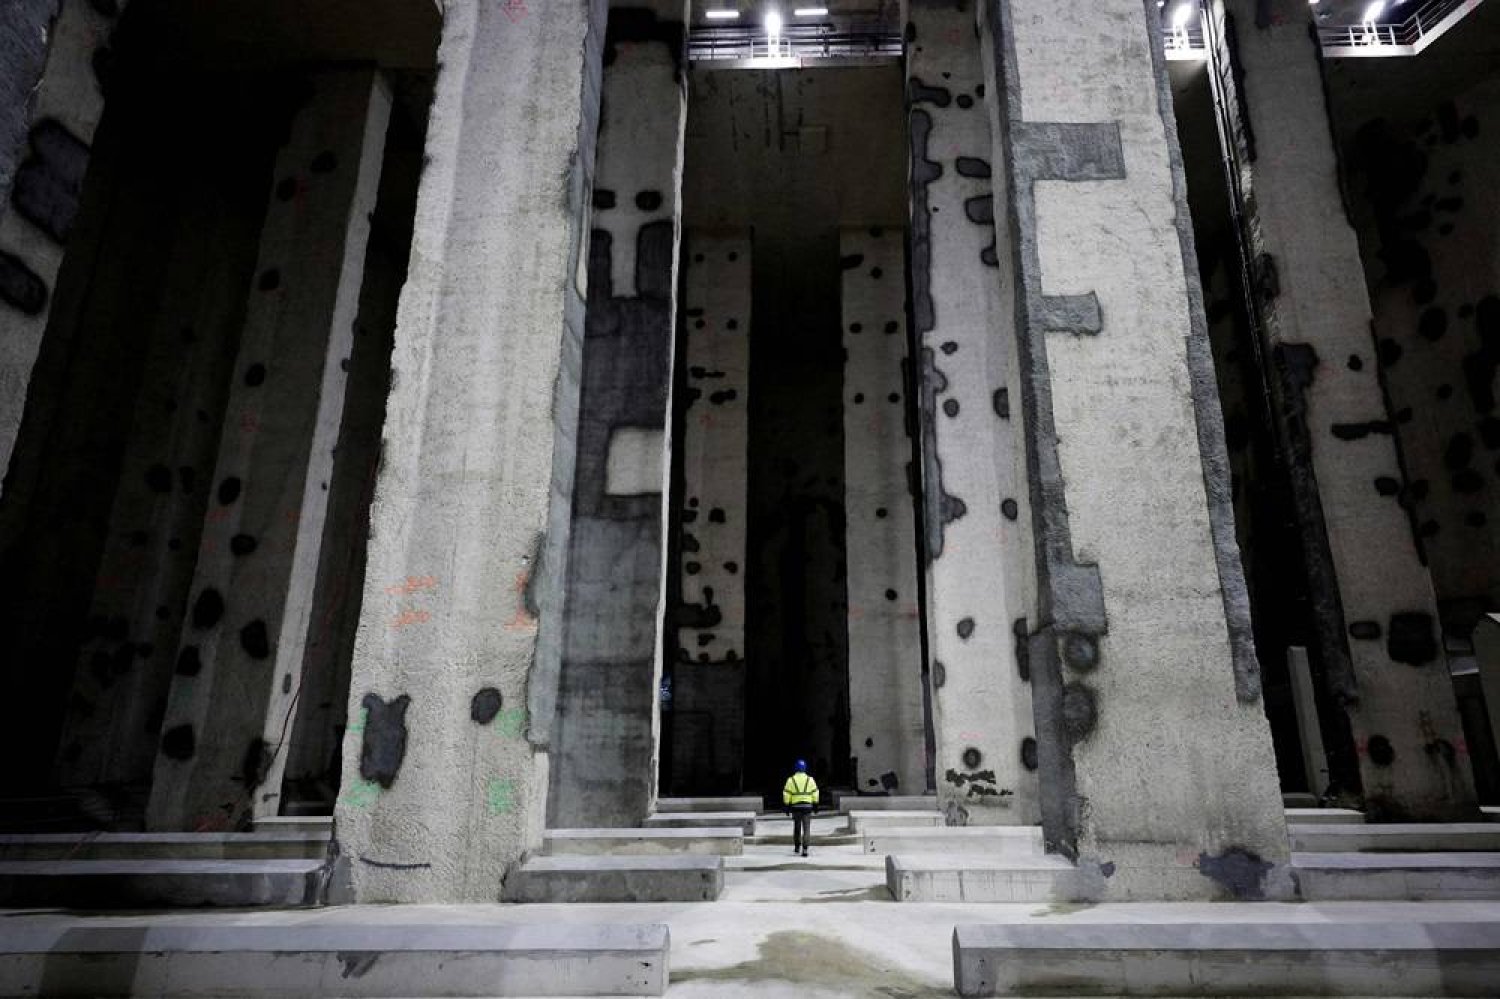 A worker walks inside the Austerlitz wastewater and rainwater storage basin, which is intended, among other things, to make the Seine swimmable during the Paris 2024 Olympic Games, in Paris, on May 2, 2024. (AFP)